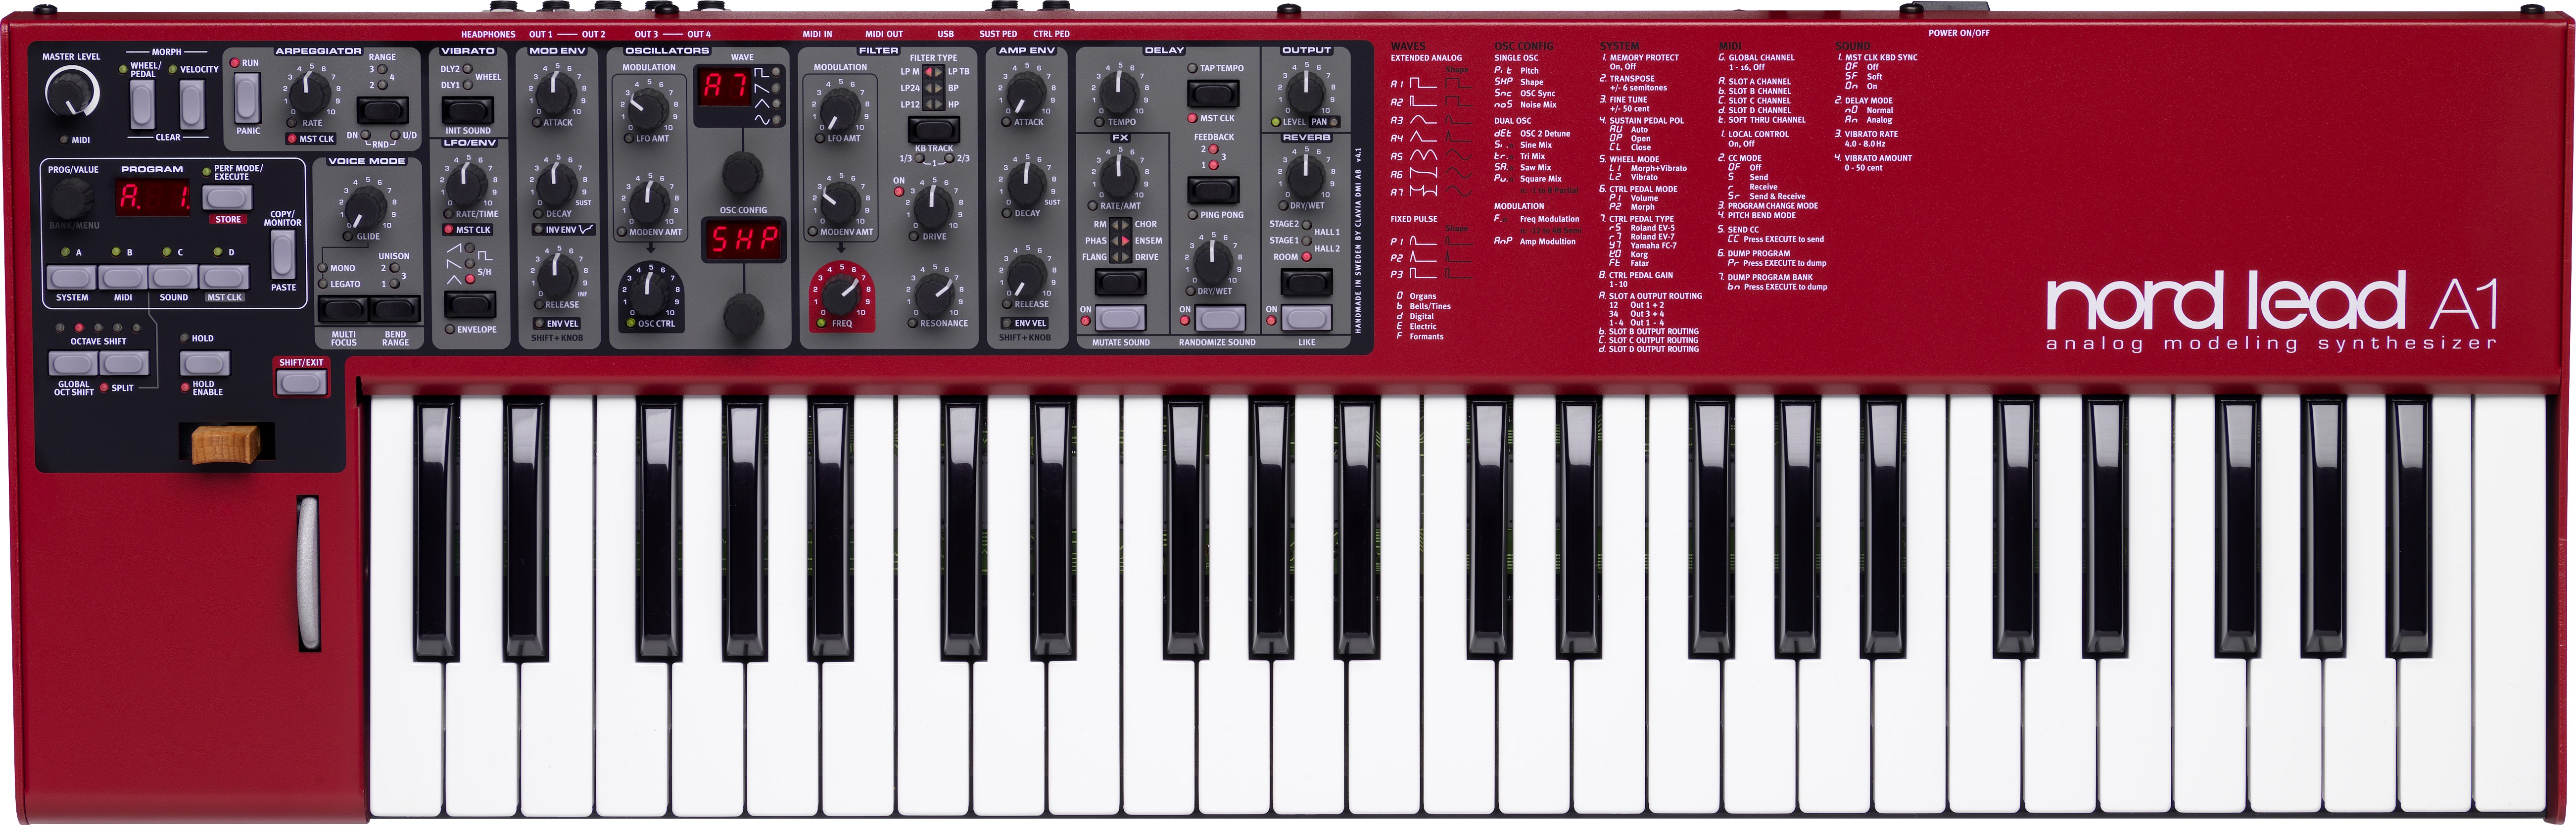 Nord Lead A1 49-Key Analog Modeling Synthesizer | Full Compass Systems